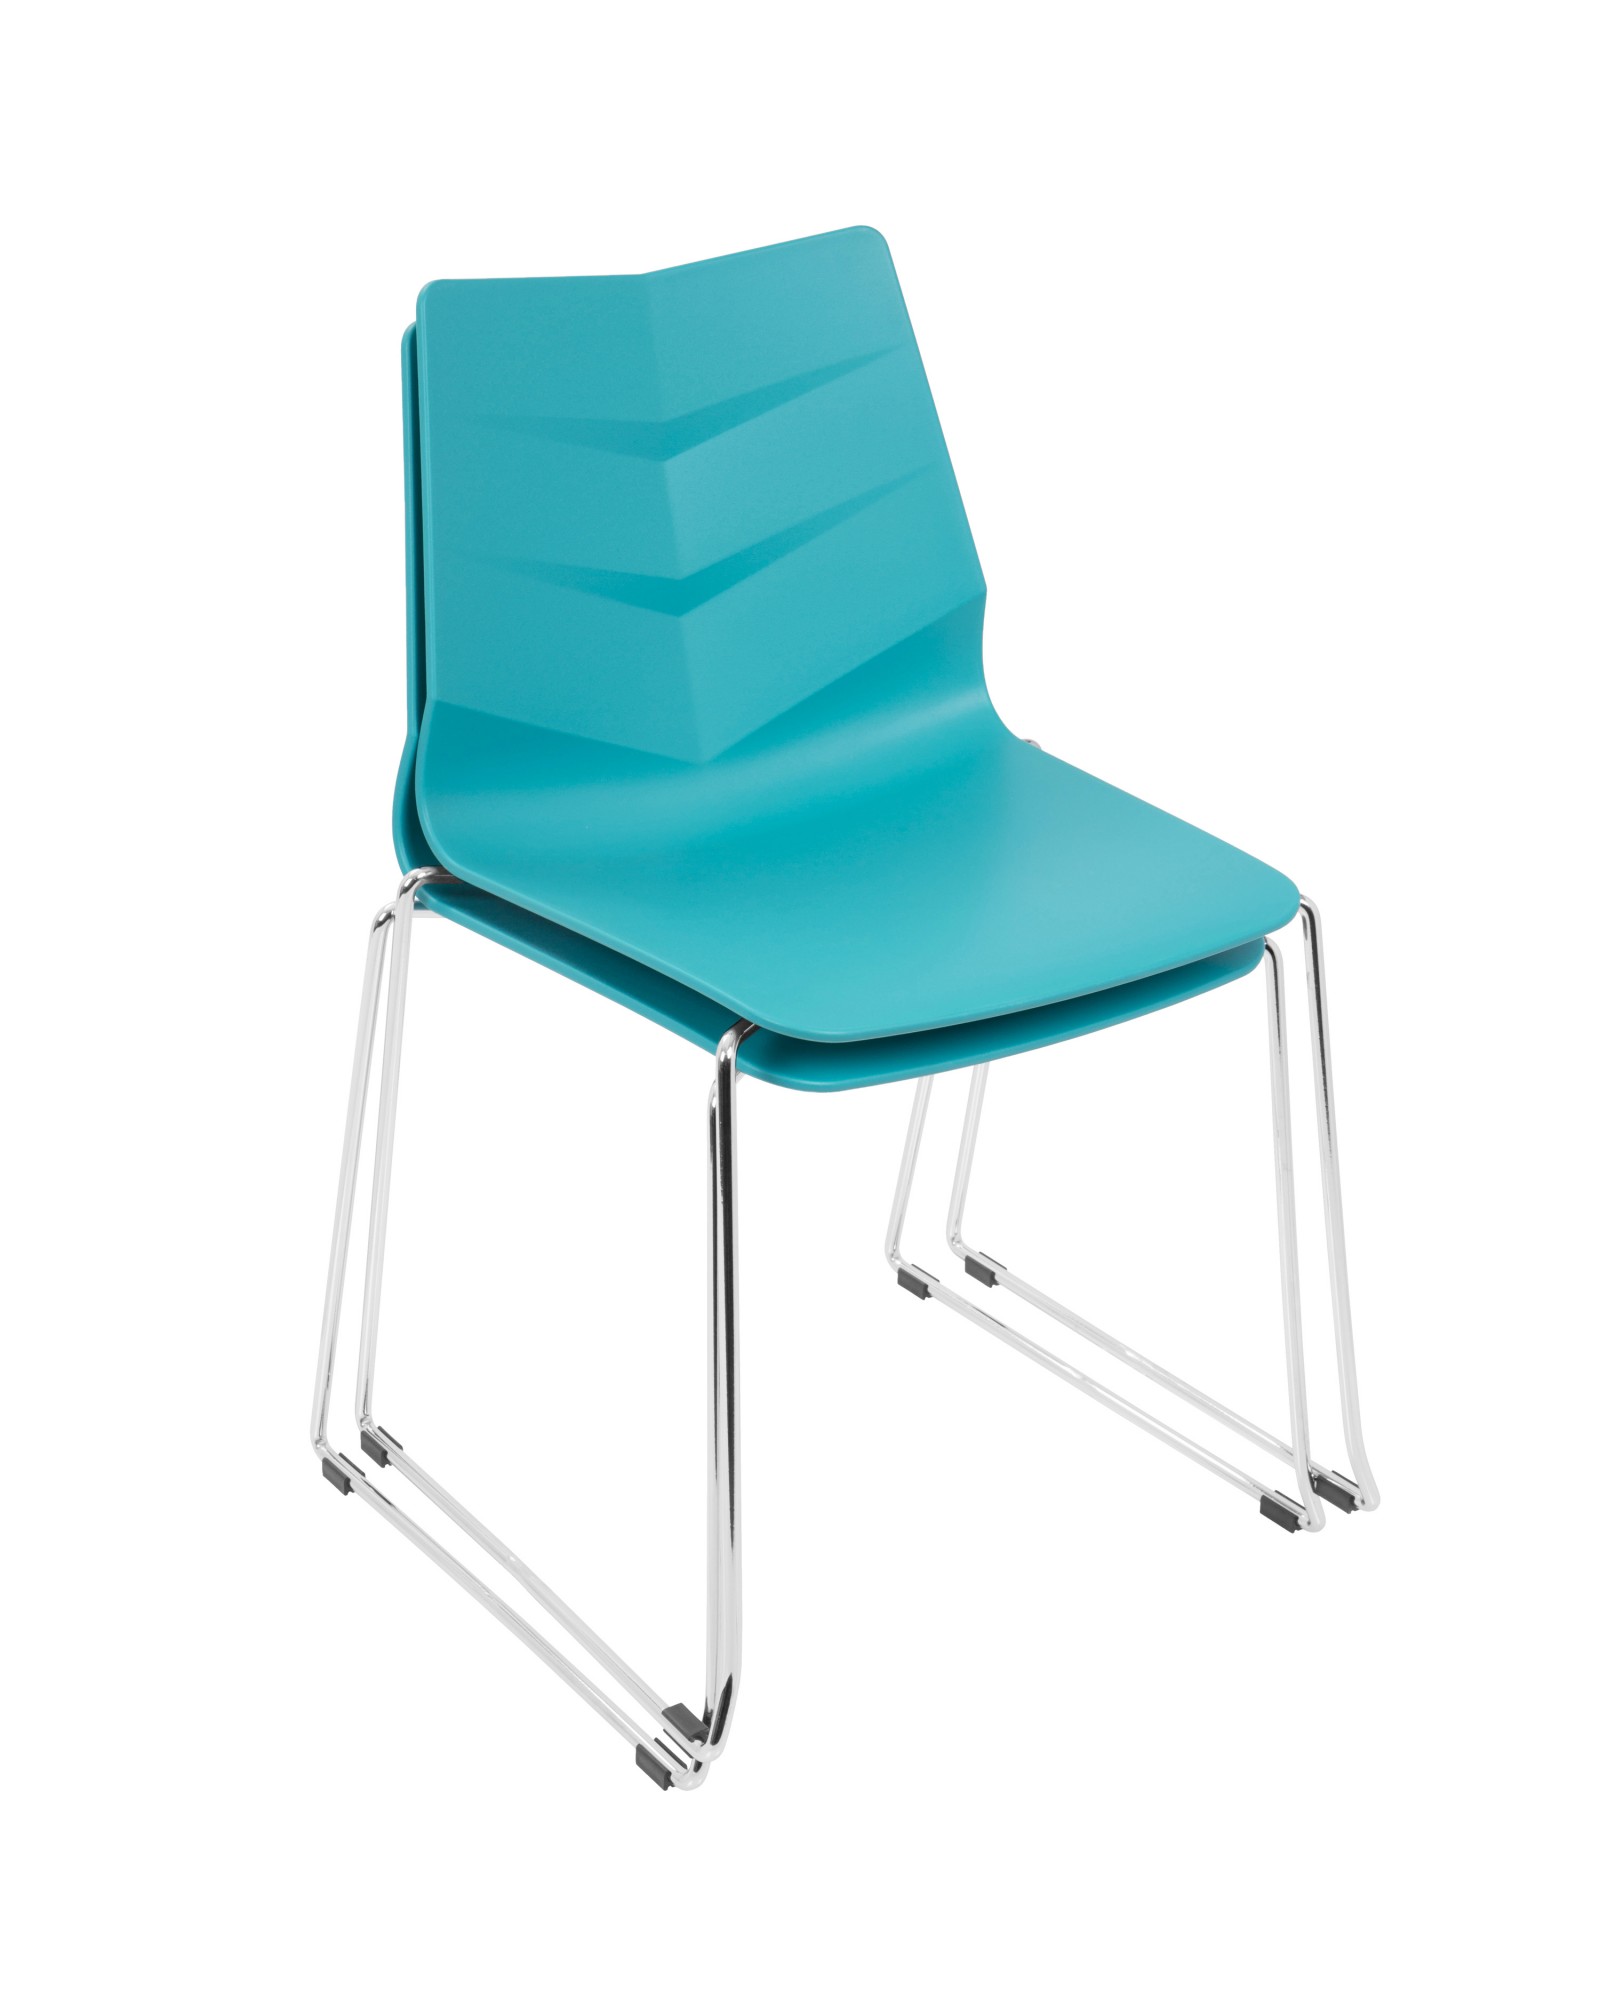 Arrow Contemporary Dining Chair in Turquoise - Set of 2